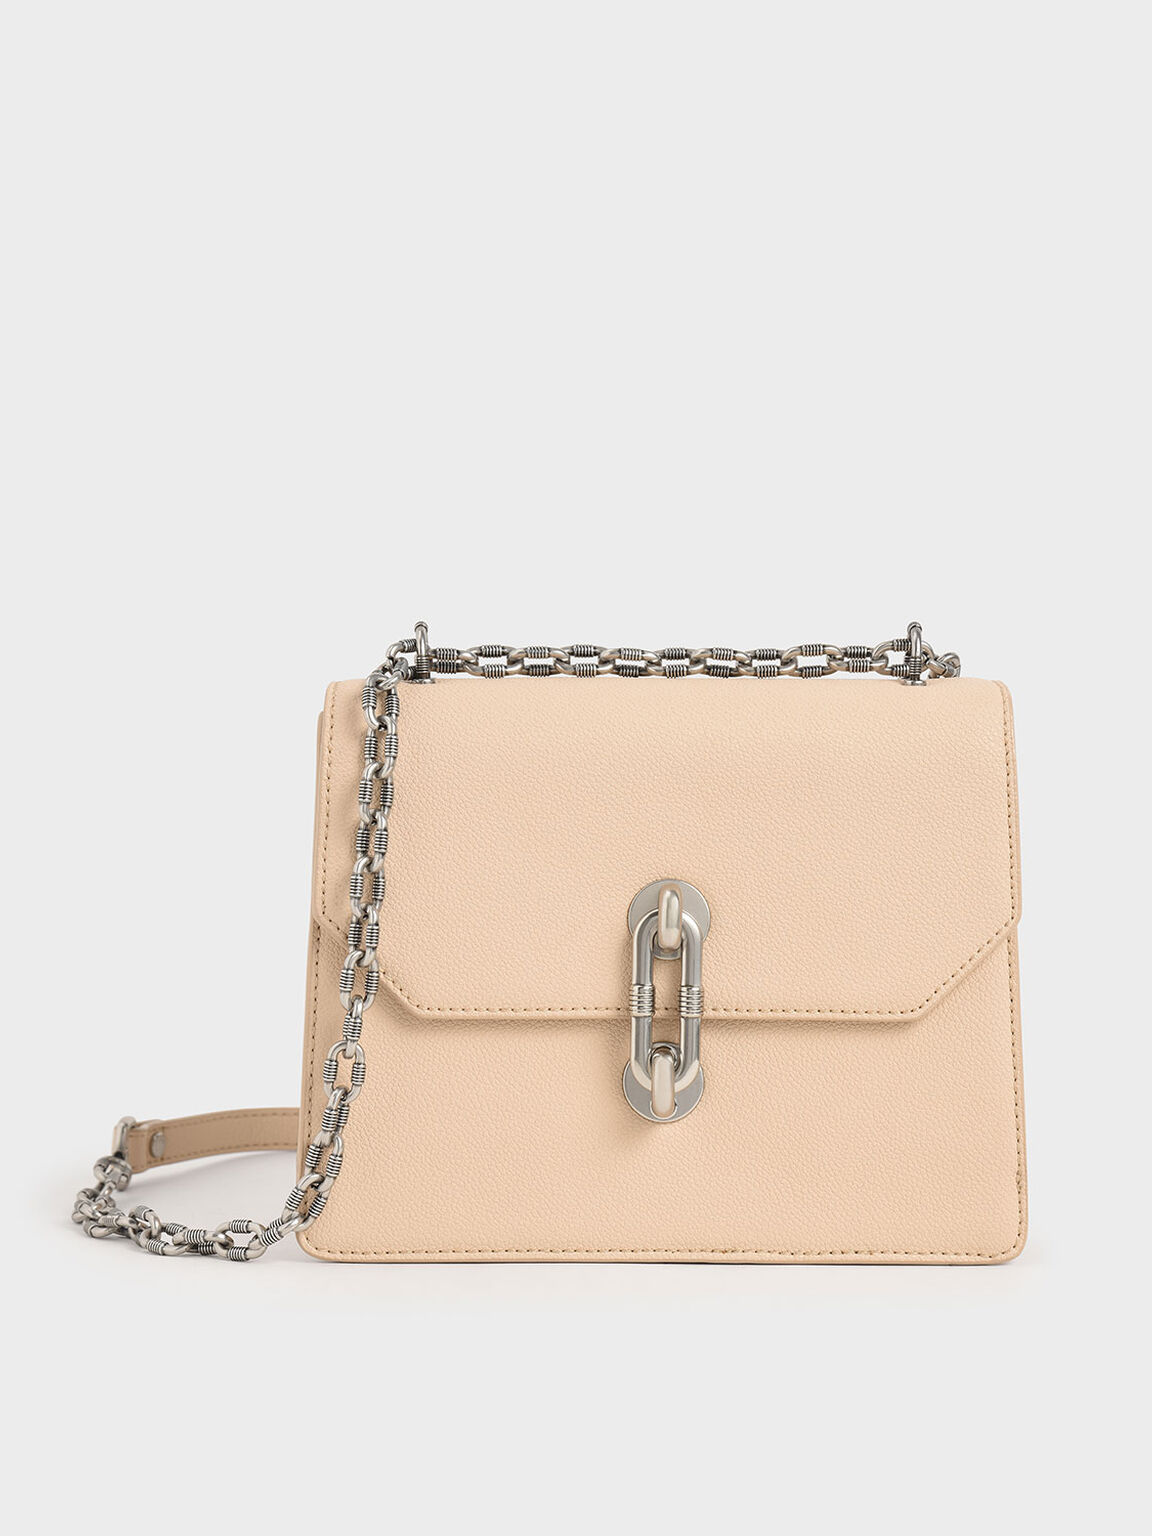 Double Chain Strap Turn-Lock Bag, Nude, hi-res